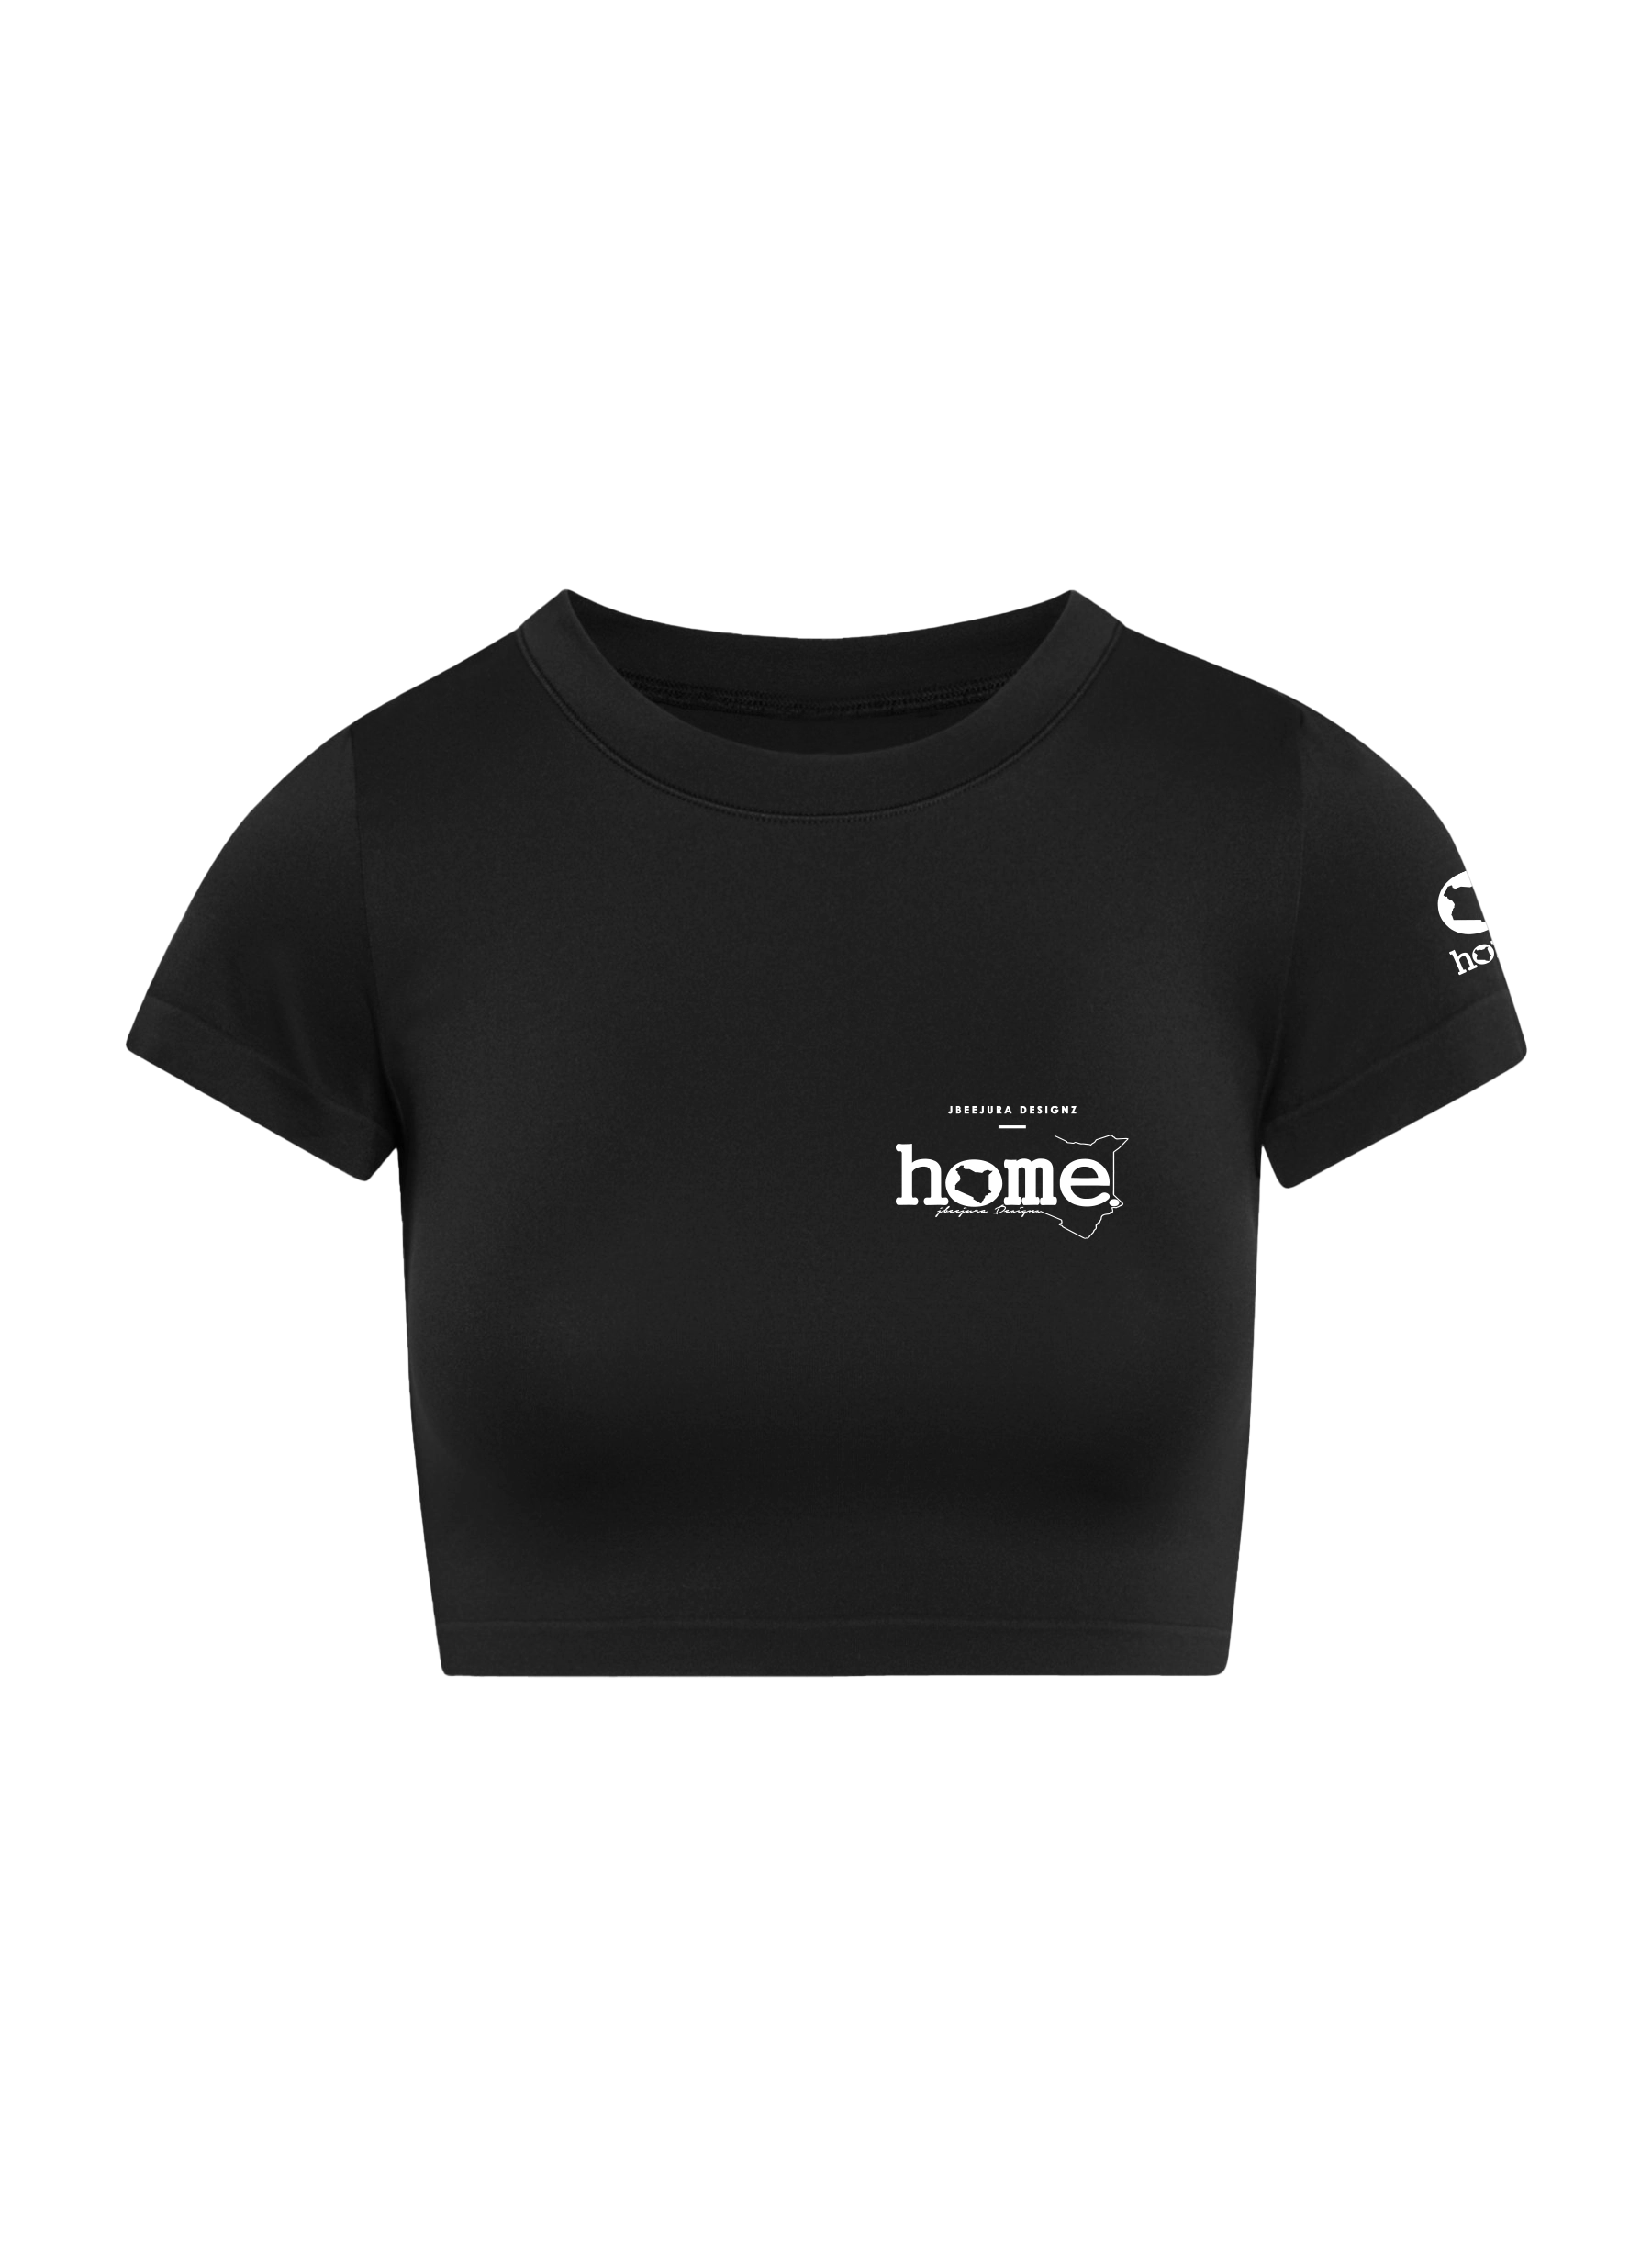 home_254 SHORT SLEEVED BLACK CROPPED ARIA TEE WITH A WHITE 3D WORDS PRINT 